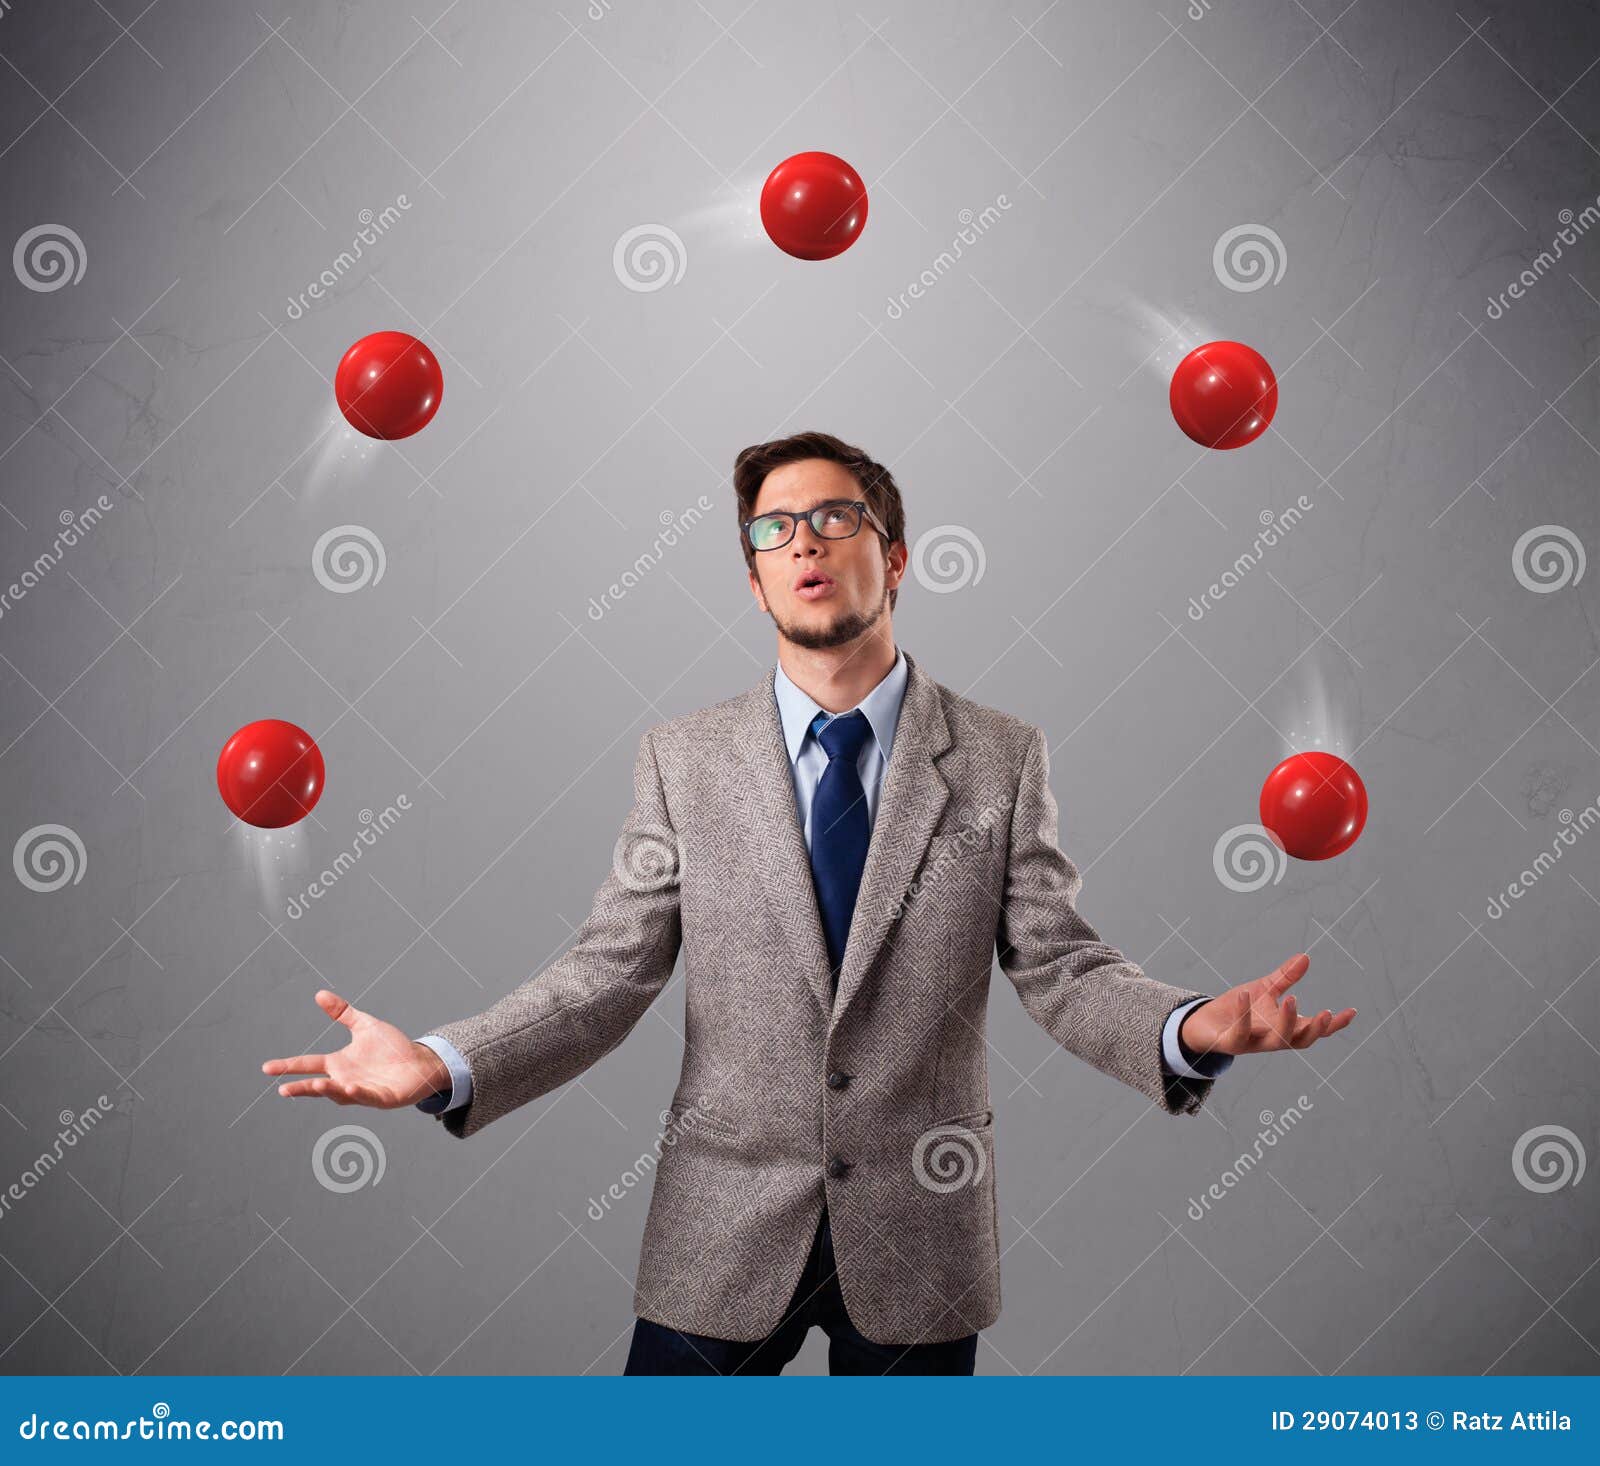 Young Man Standing And Juggling With Red Balls Stock Photos - Image